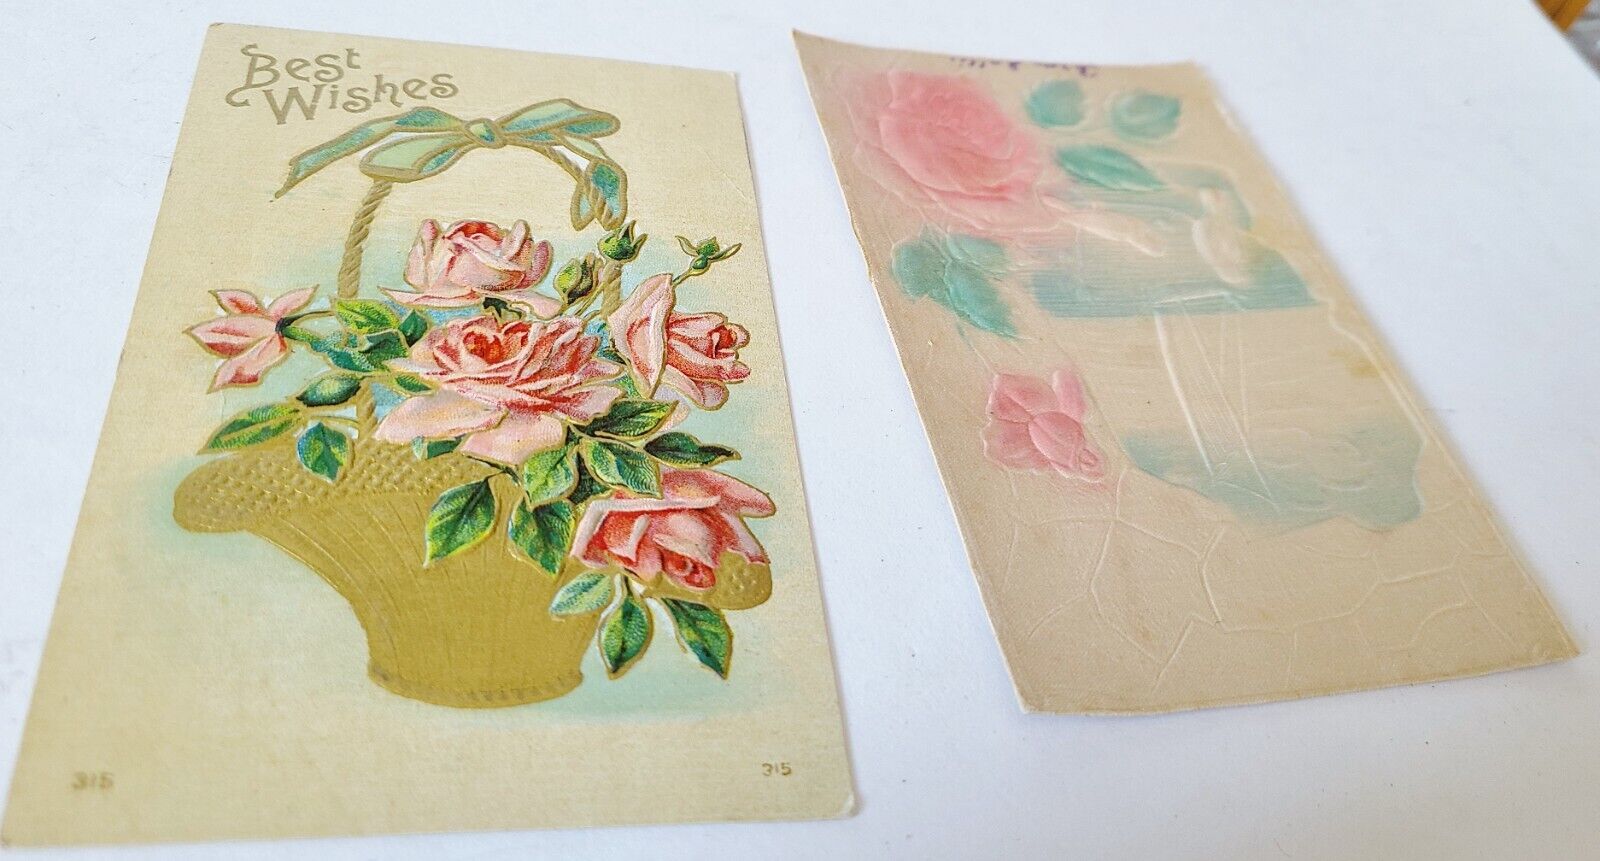 2 Antique Greetings Postcards Best Wishes Roses Embossed